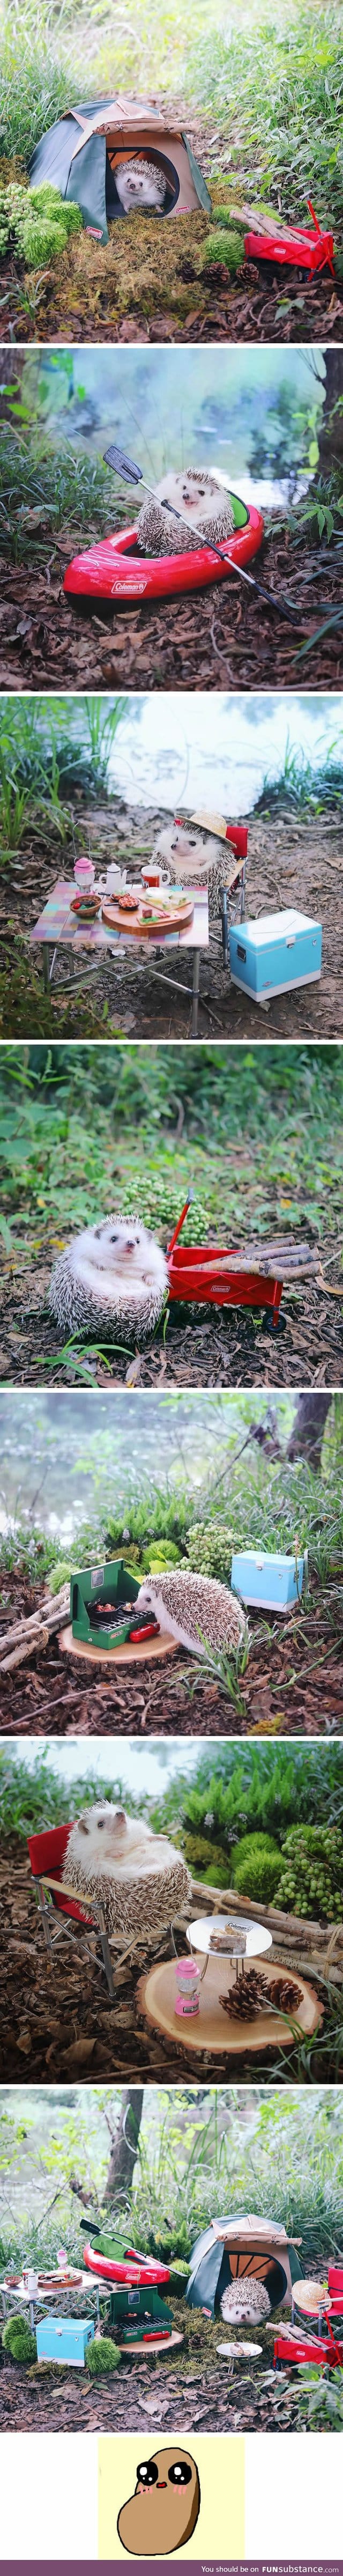 This camping hedgehog is the cutest thing you see today